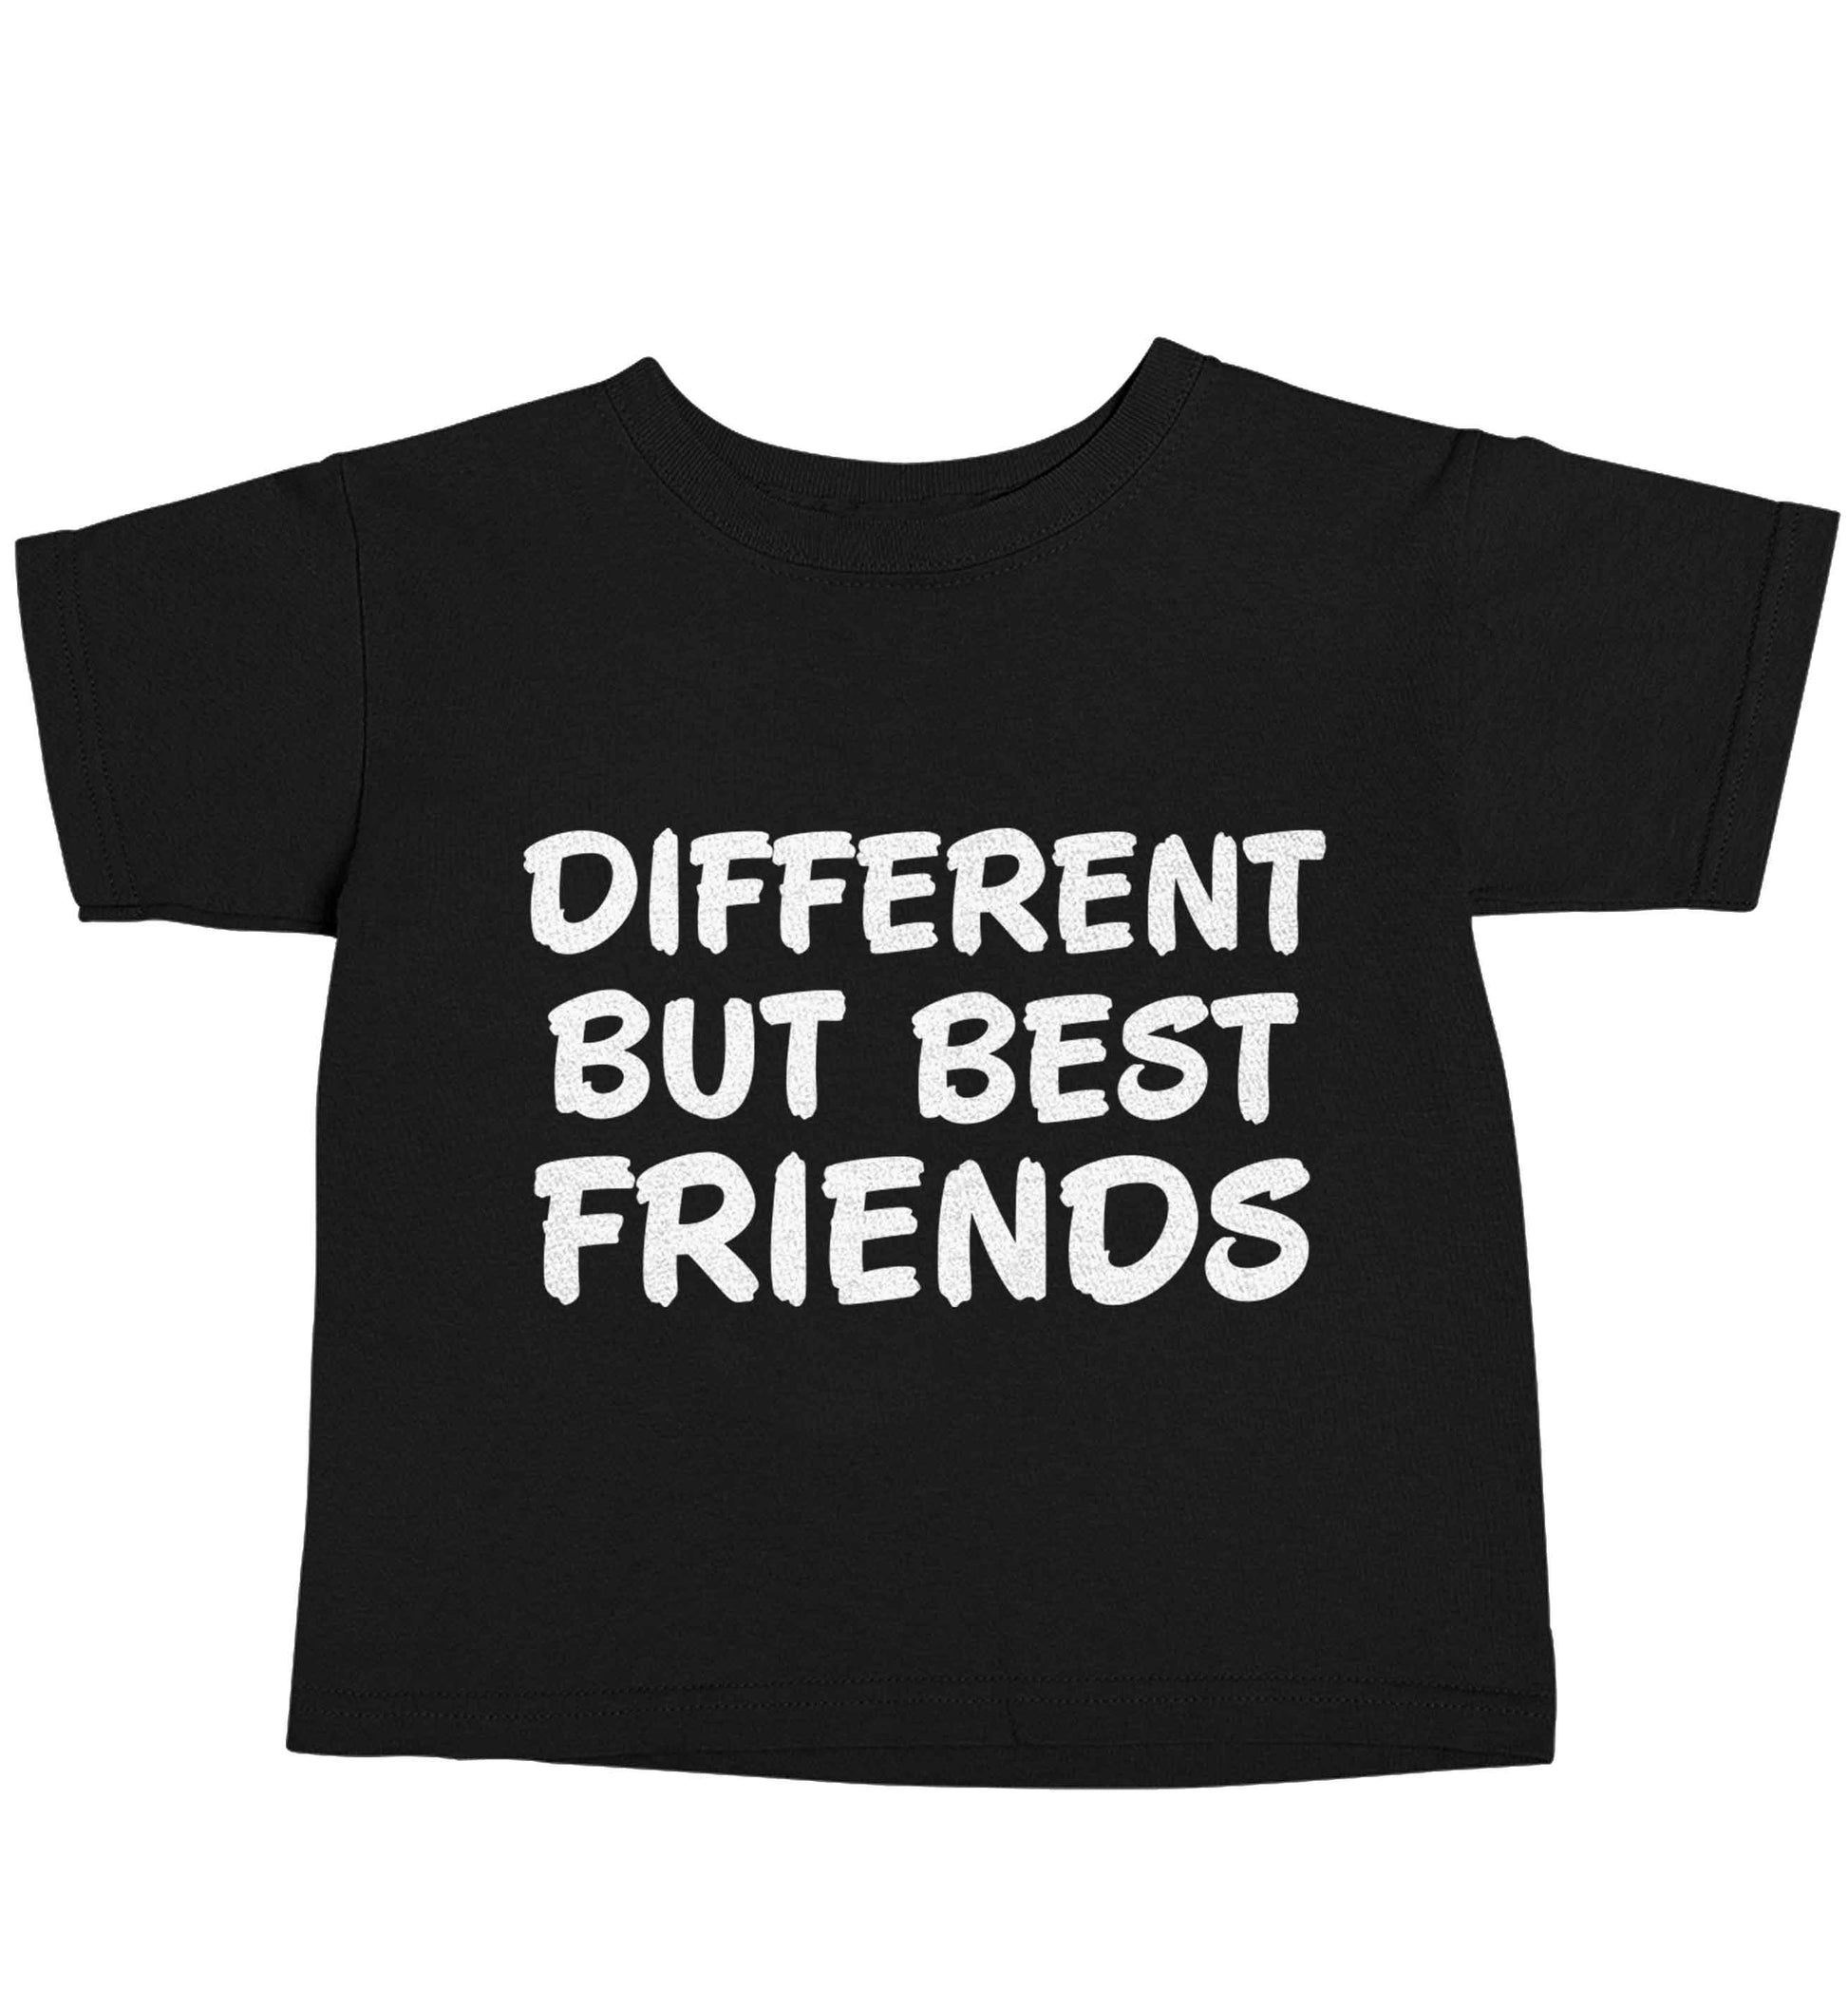 Different but best friends Black baby toddler Tshirt 2 years